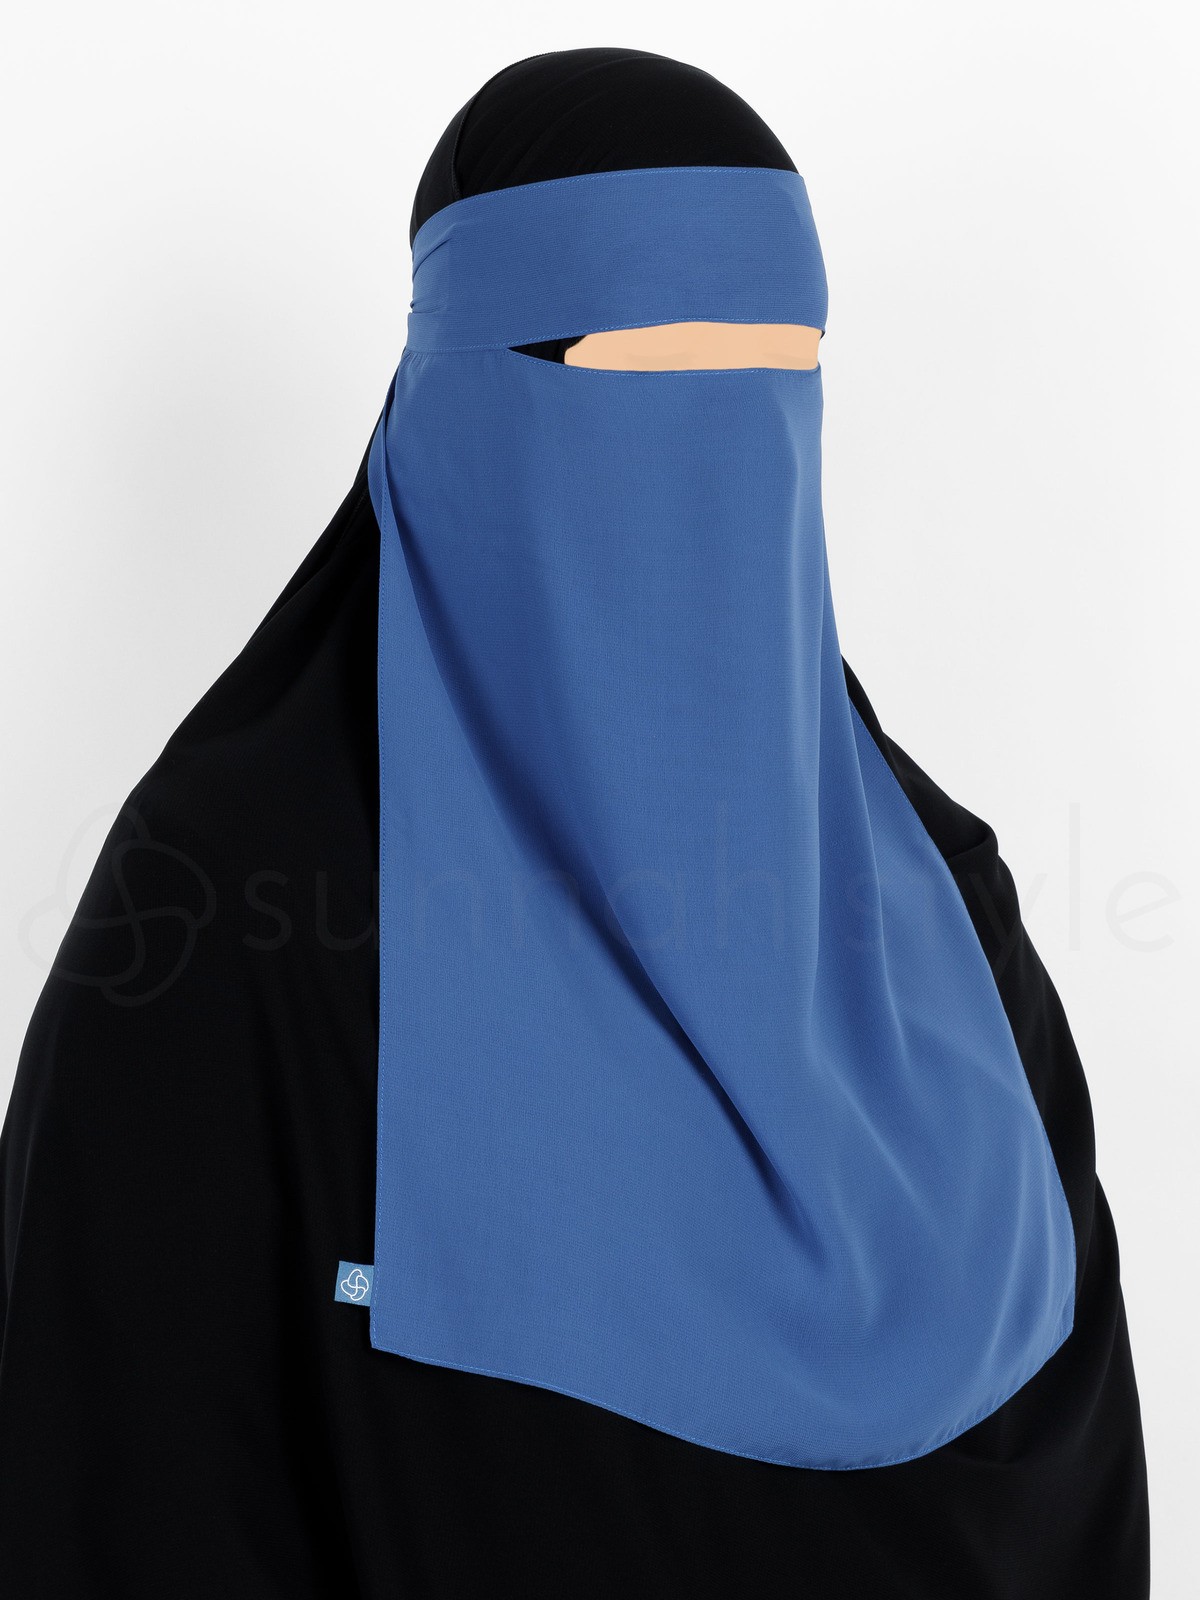 Sunnah Style - One Layer Niqab (Blue Jay)